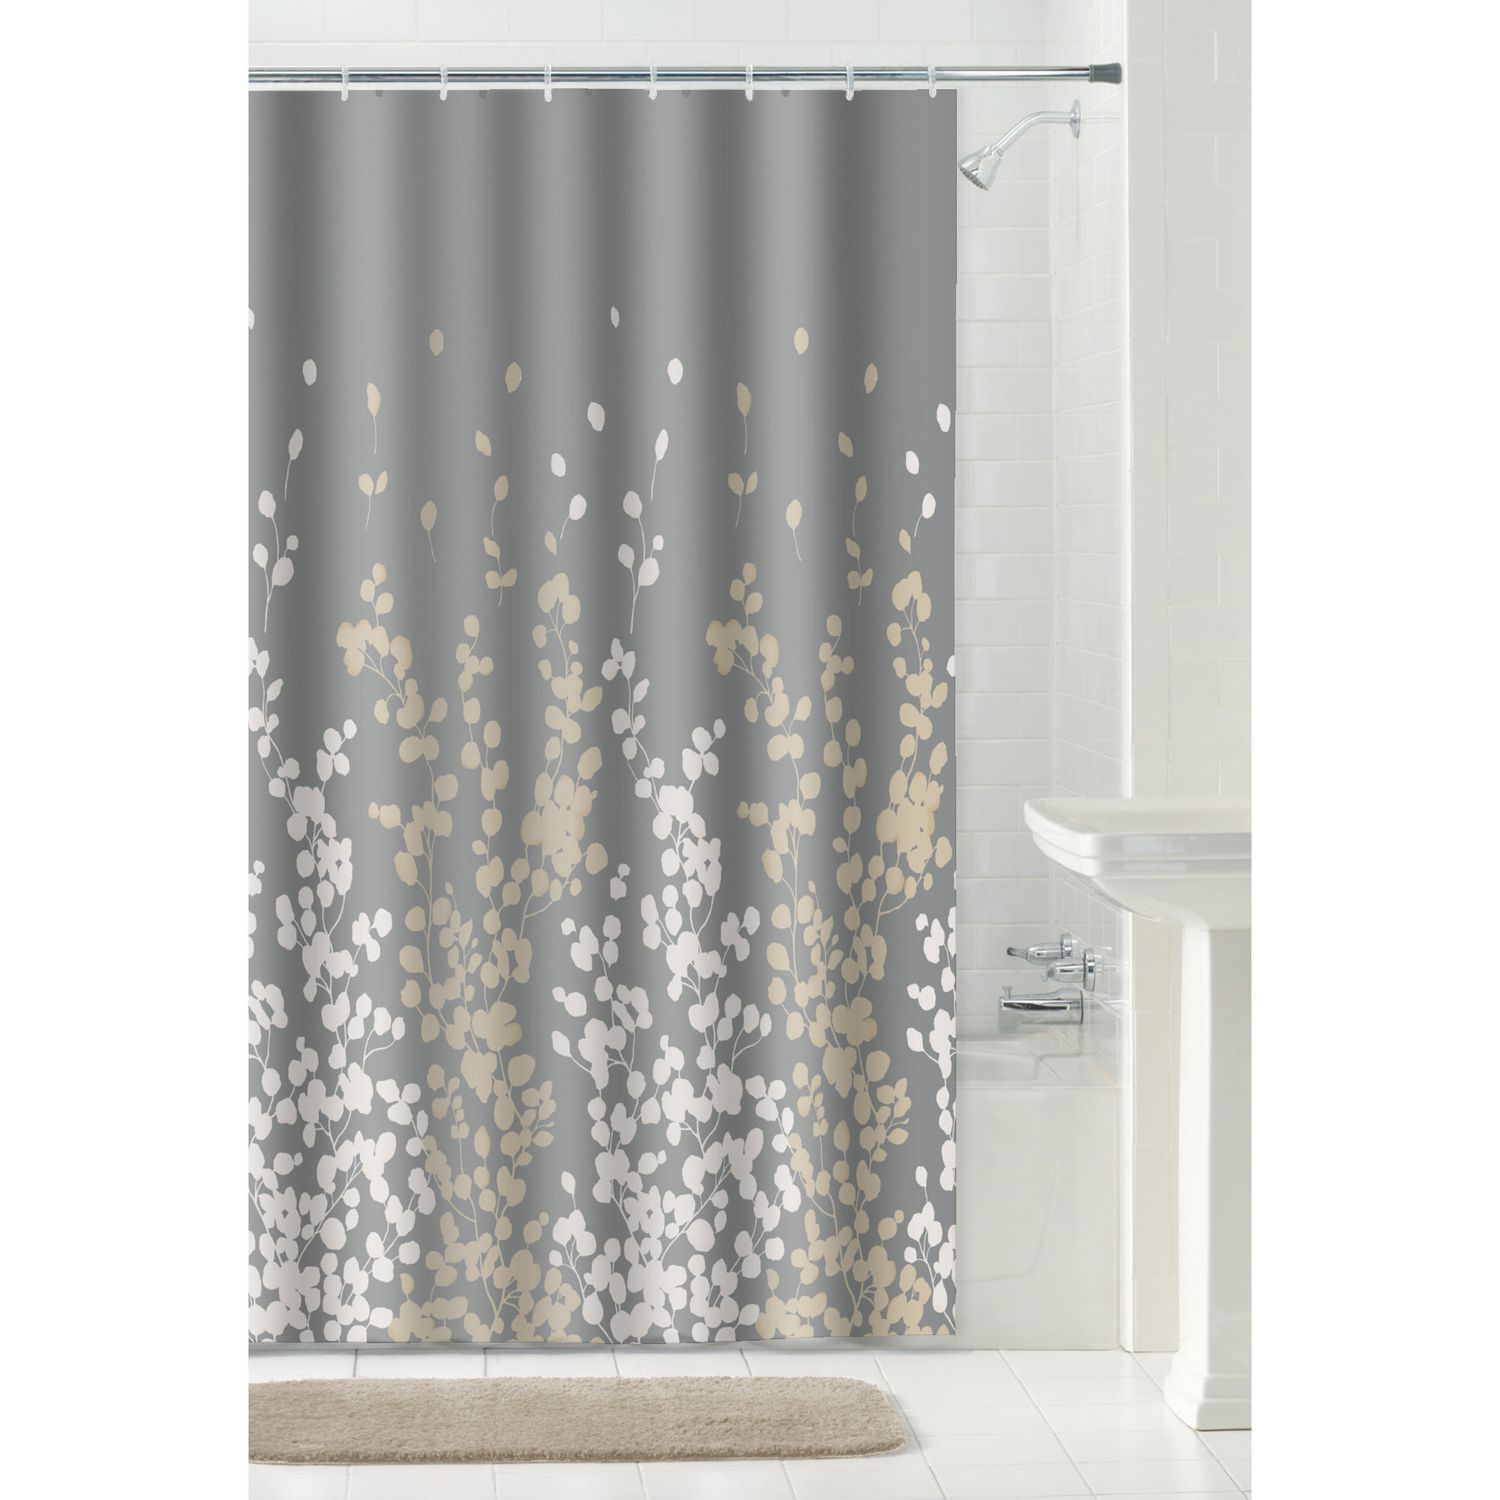 72" x 84" Details about   InterDesign 35694 Leaves Fabric Shower Curtain Purple/White Long 